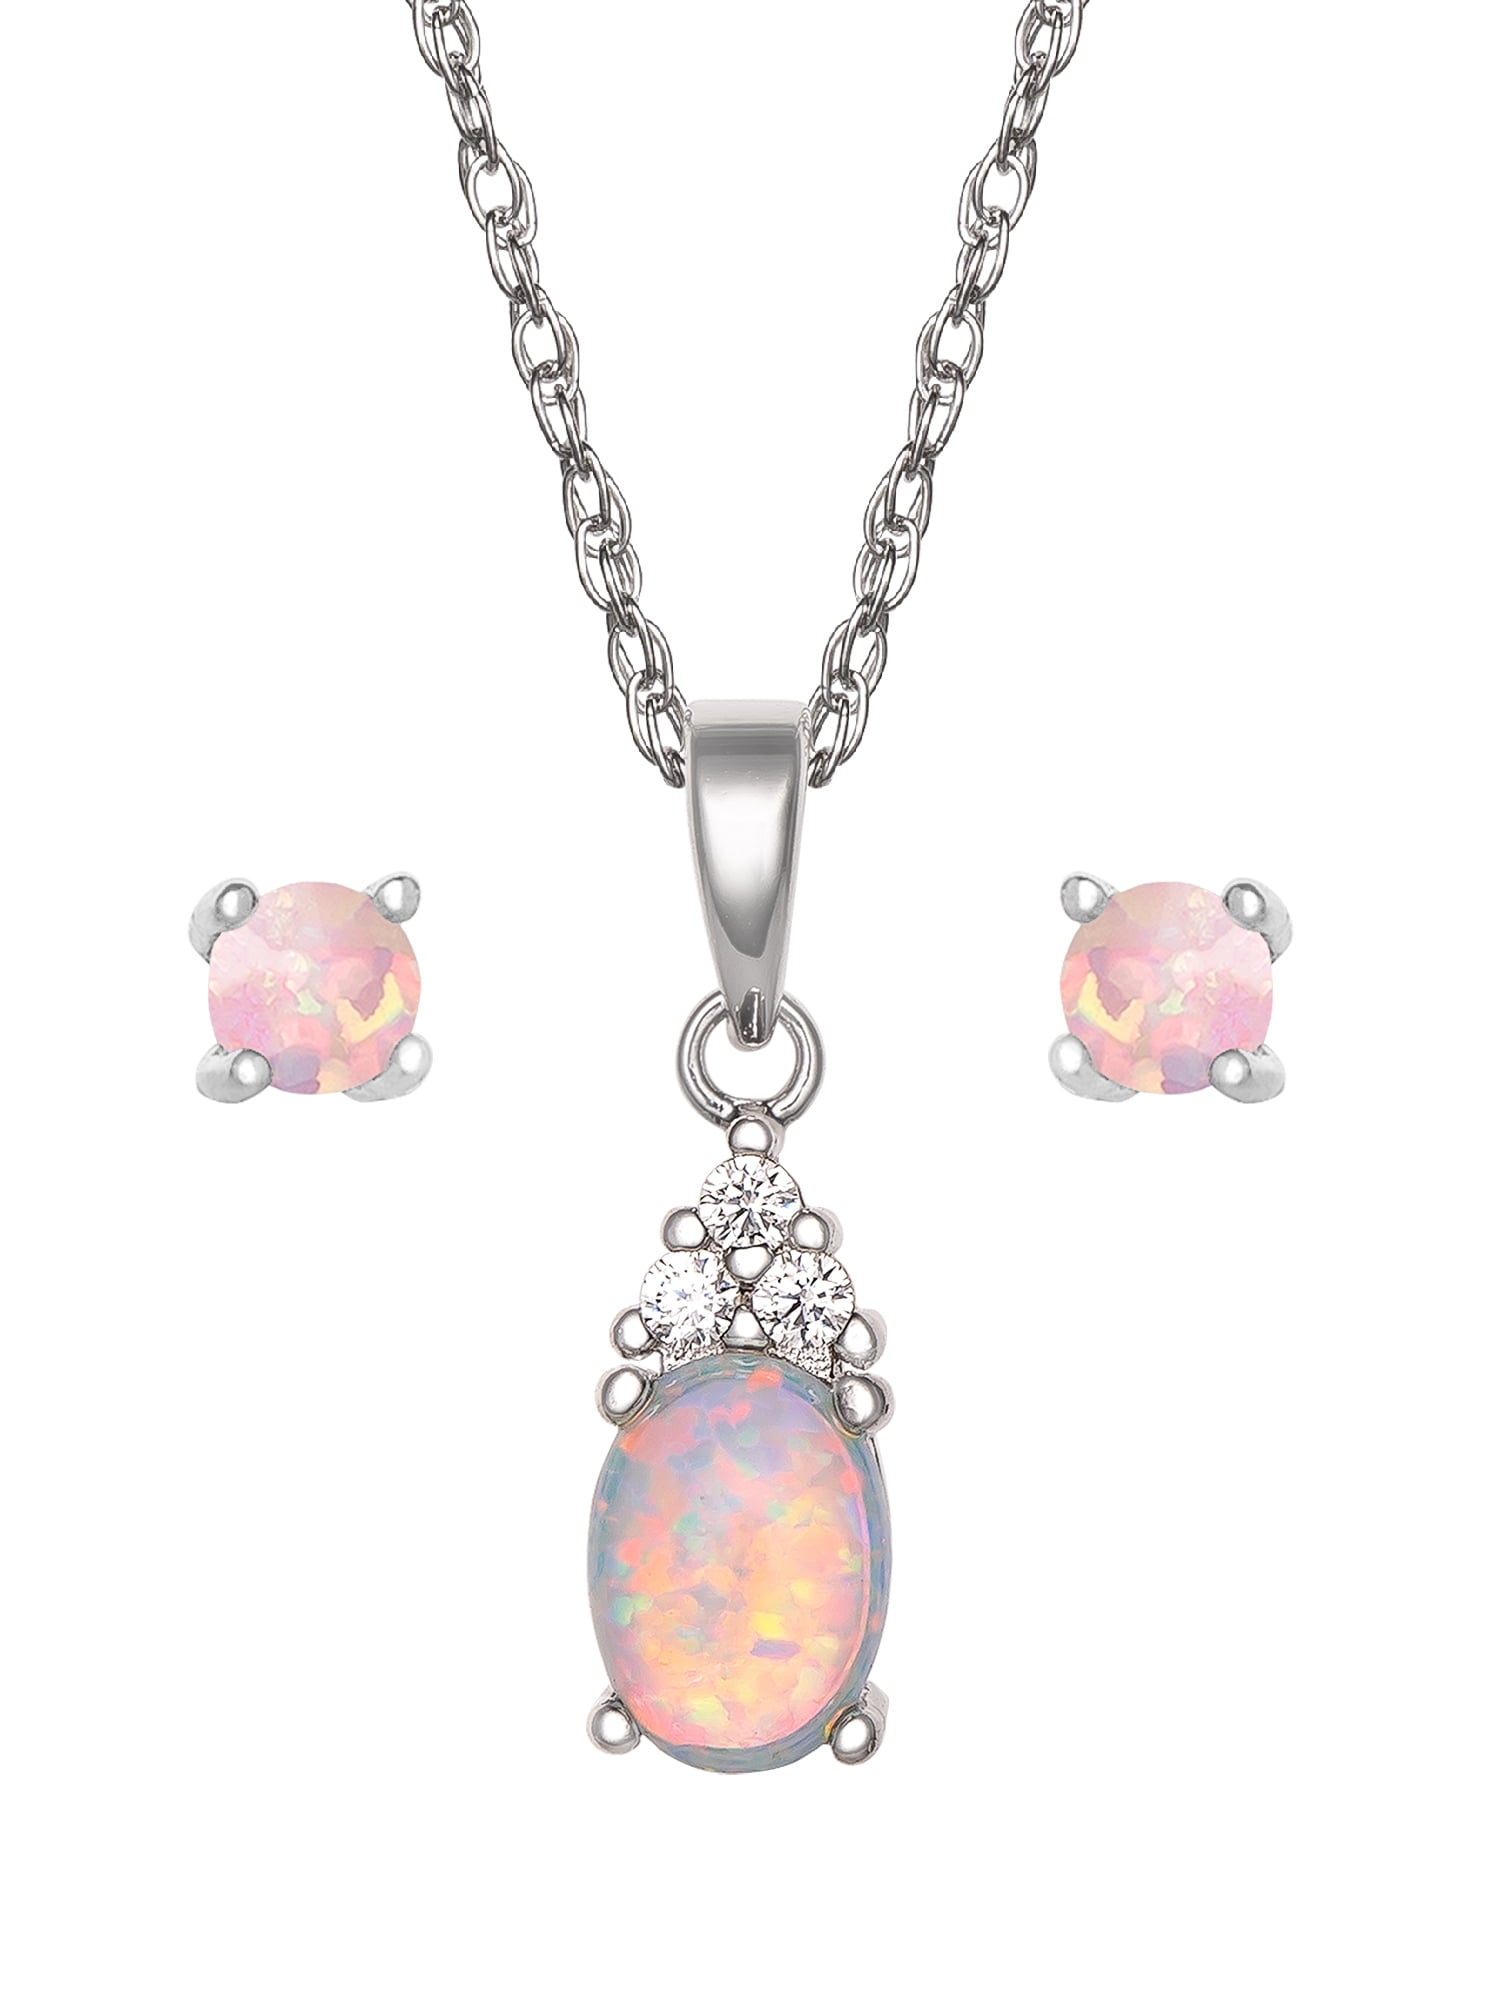 Solid Sterling Silver Rhodium Plated 10 Millimeter Pink Simulated Opal Pendant Necklace